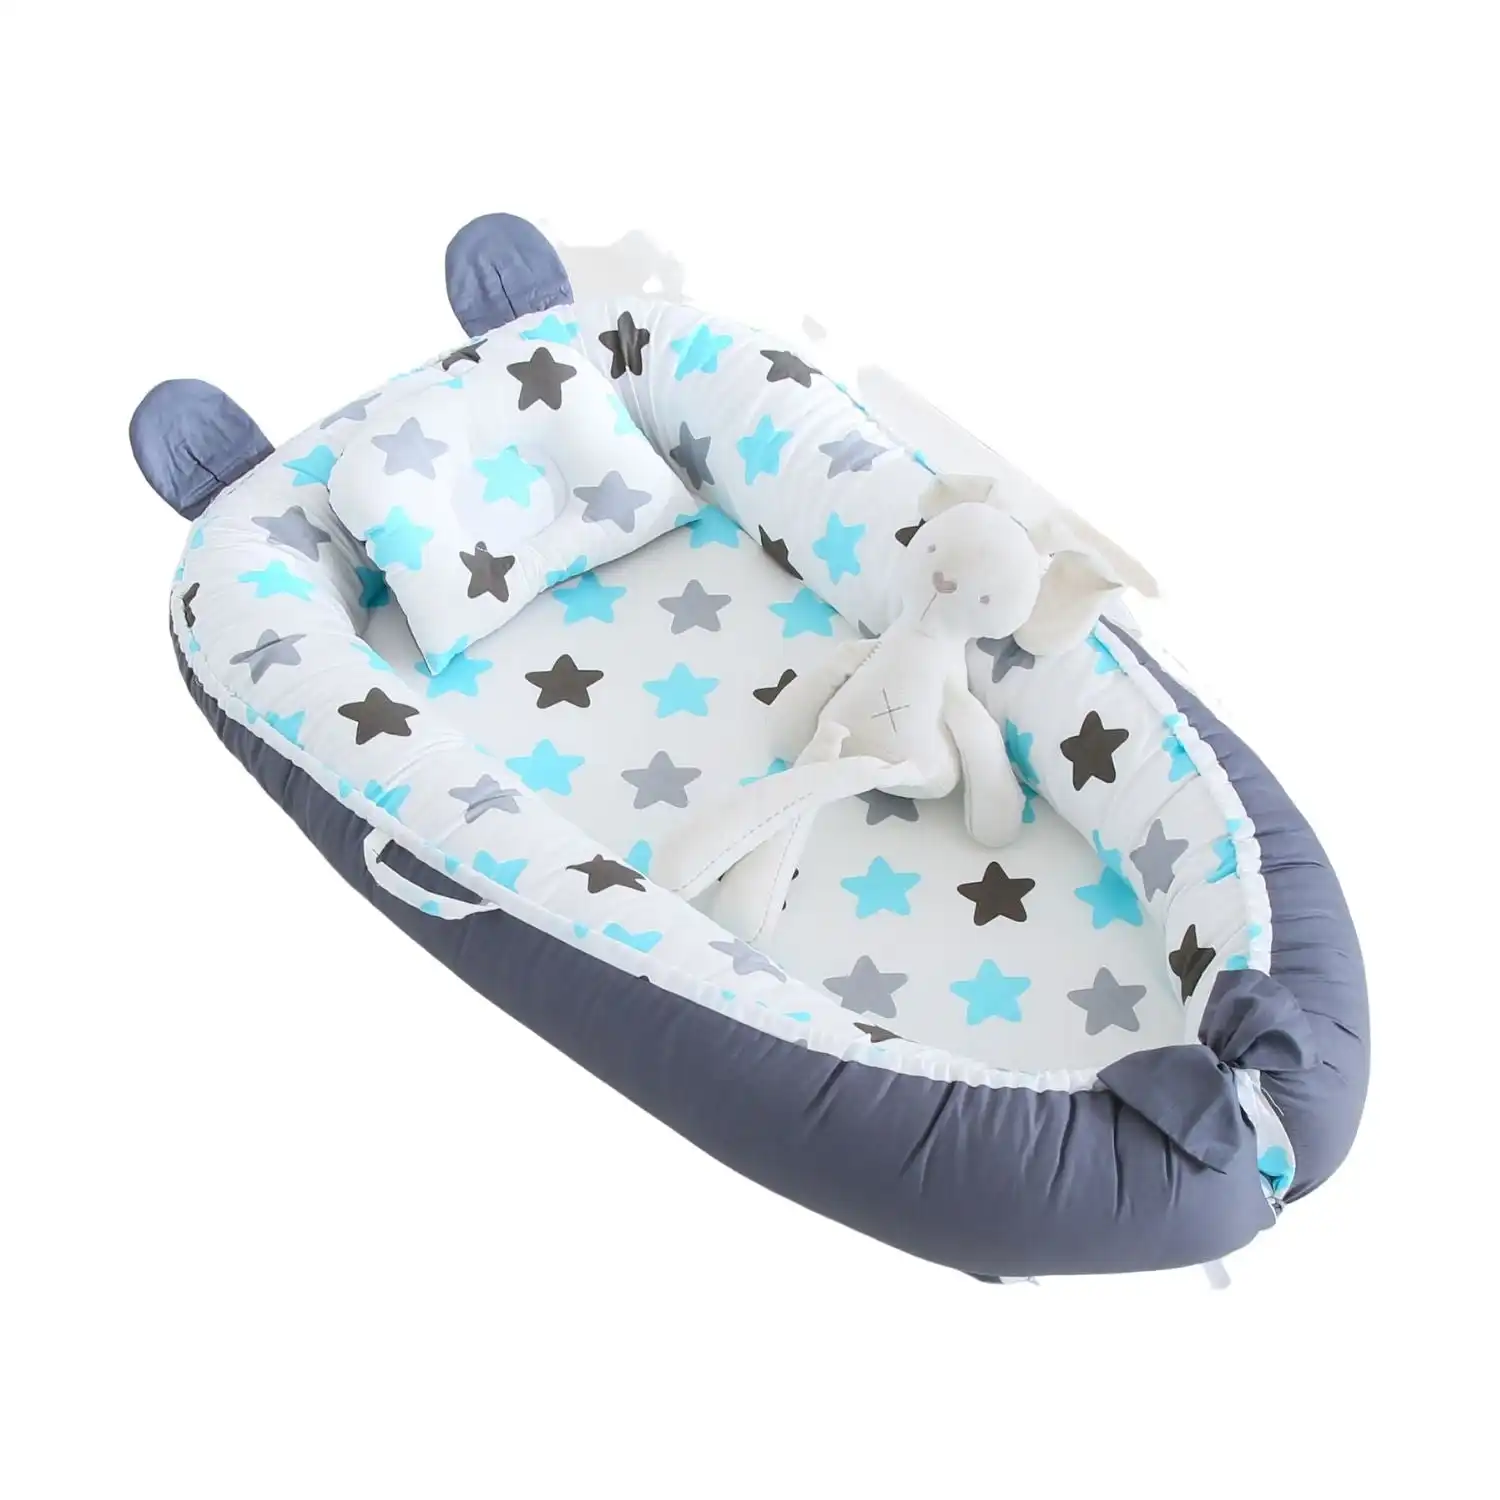 Gominimo Hidden Zipper Breathable Material Portable Baby Lounger & Baby Nest With Pillow (Stars)